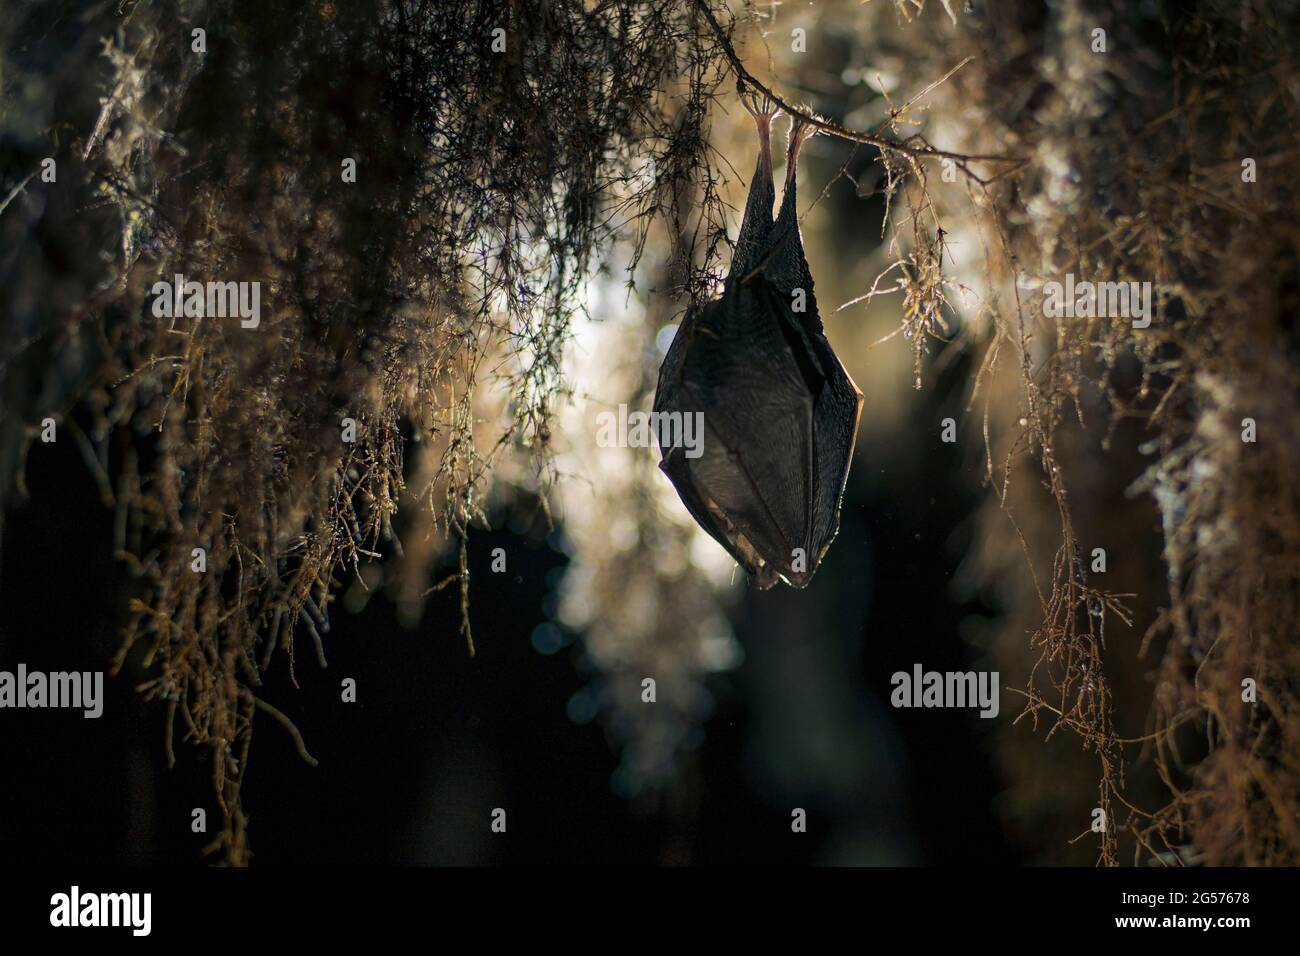 Název Close up small lesser horseshoe bat covered by wings, hanging upside down on top of by roots growth arched cellar while hibernating. Creative w Stock Photo